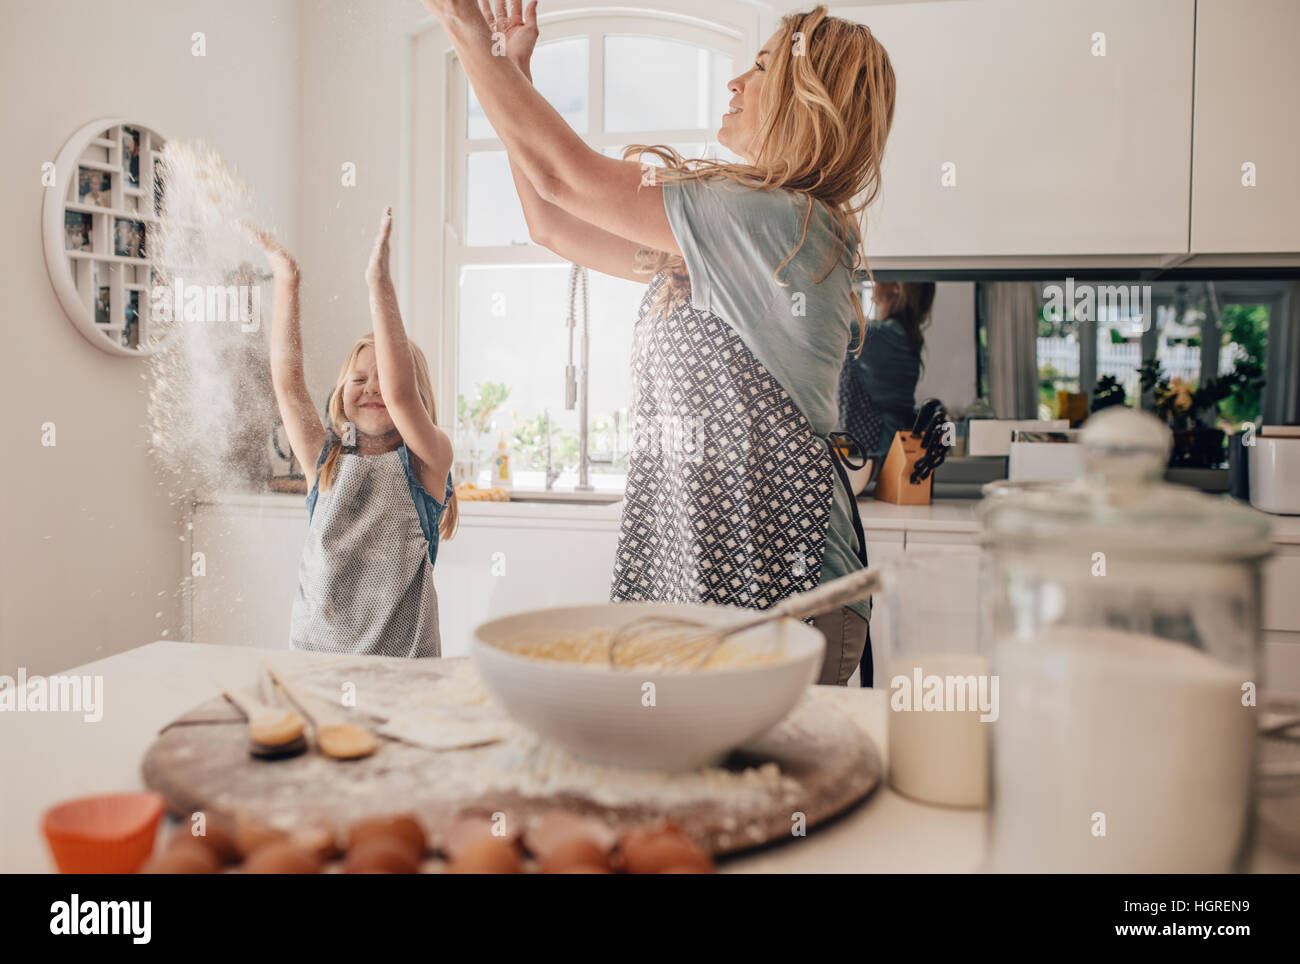 Happy young family having fun in kitchen throwing flour in air. Mother and daughter making dough in kitchen. Stock Photo